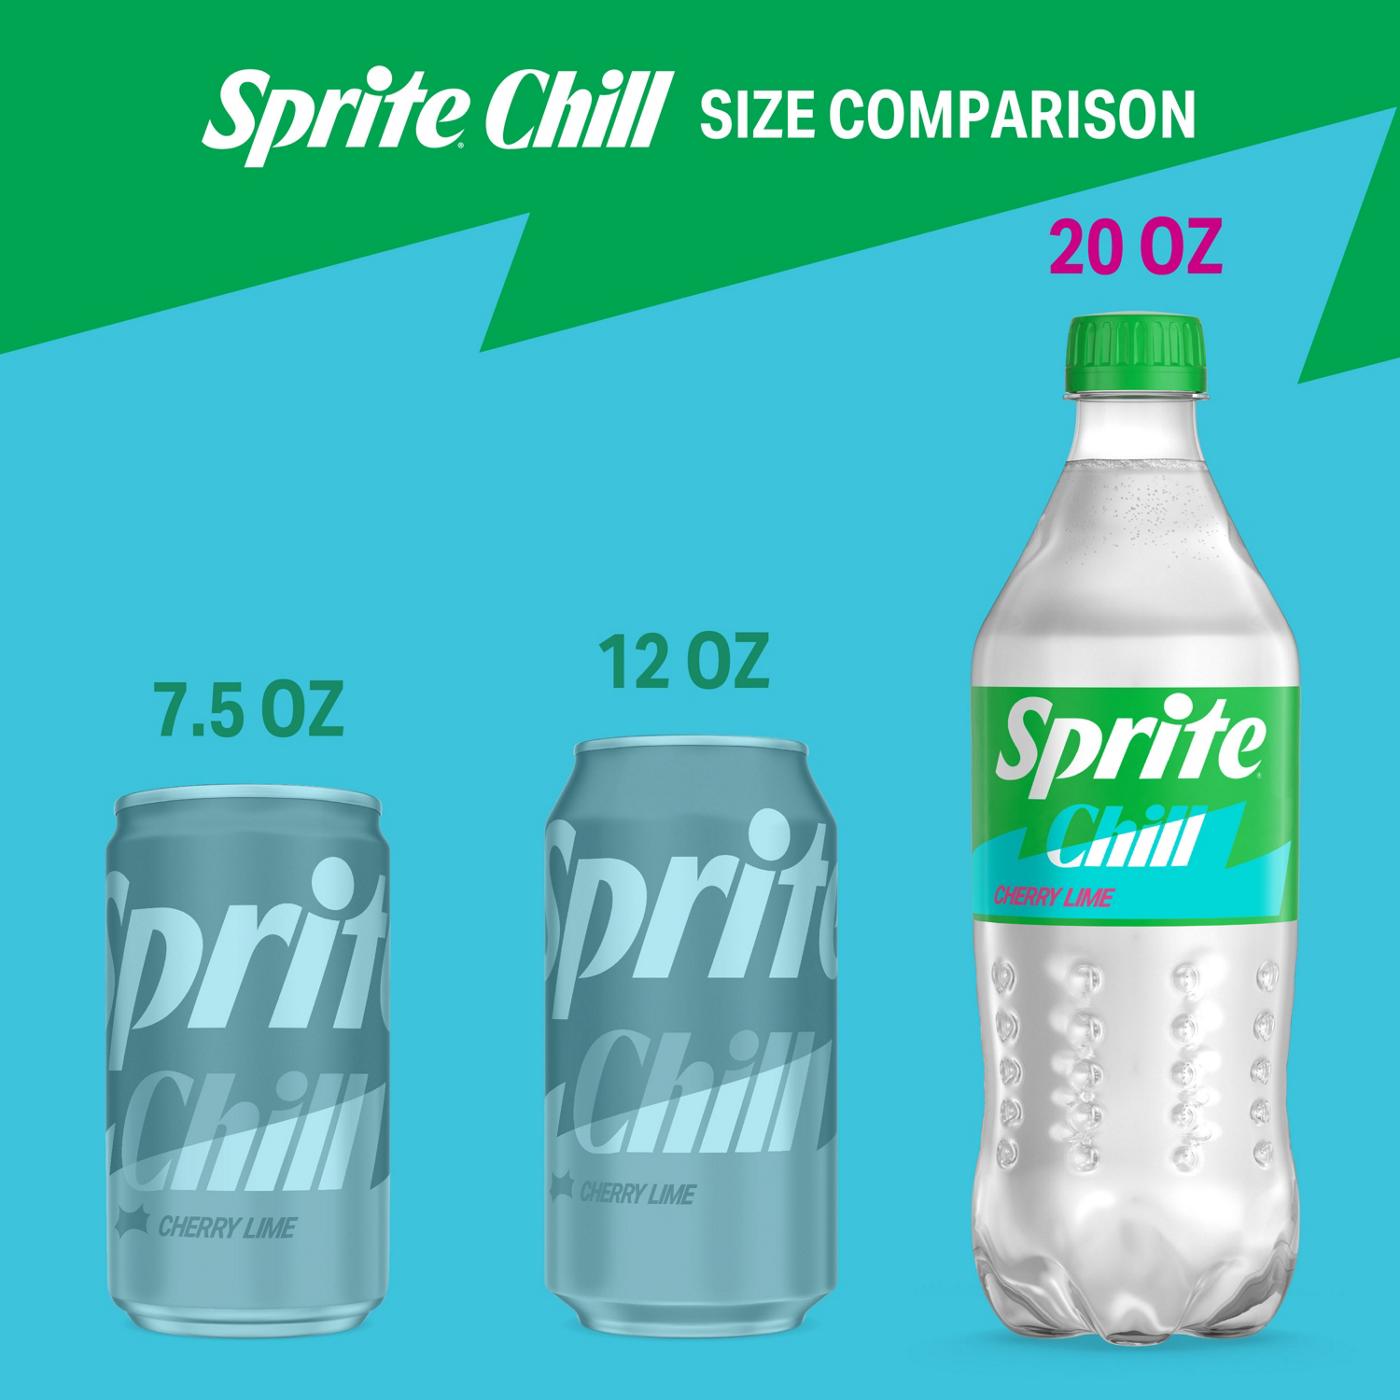 Sprite Chill Cherry Lime Bottle; image 4 of 4